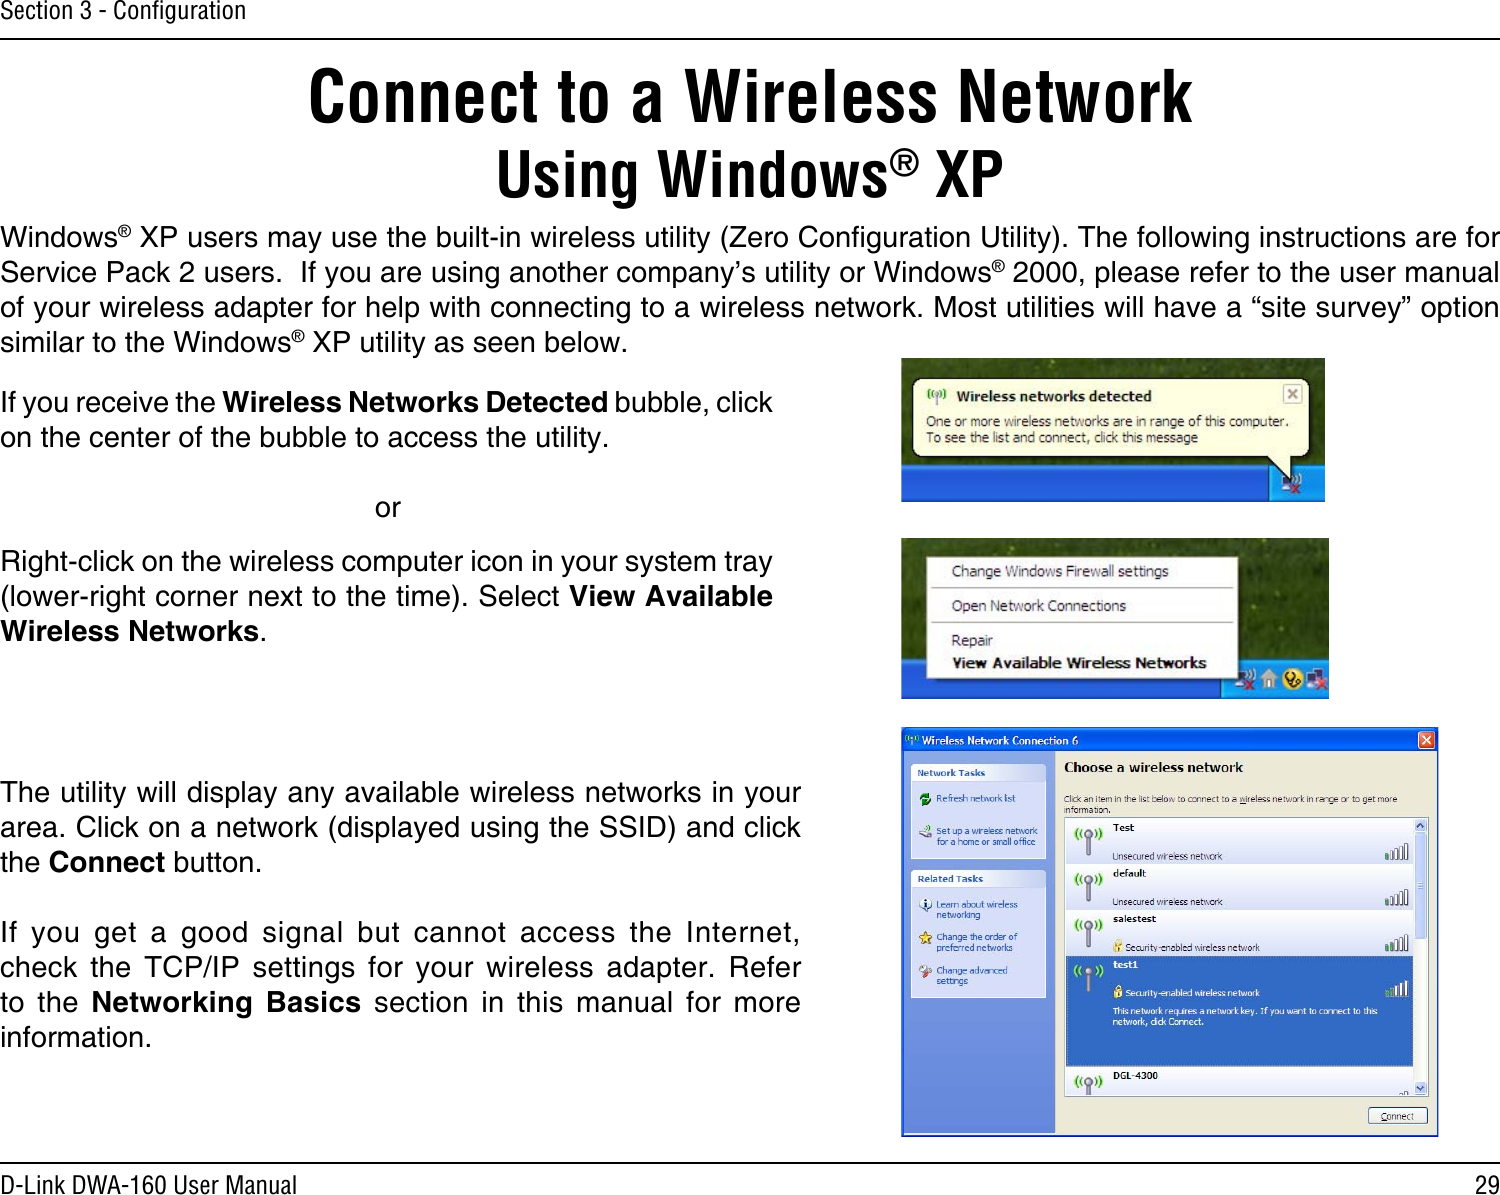 29D-Link DWA-160 User ManualSection 3 - ConﬁgurationConnect to a Wireless NetworkUsing Windows® XPWindows® XP users may use the built-in wireless utility (Zero Conguration Utility). The following instructions are for Service Pack 2 users.  If you are using another company’s utility or Windows® 2000, please refer to the user manual of your wireless adapter for help with connecting to a wireless network. Most utilities will have a “site survey” option similar to the Windows® XP utility as seen below.Right-click on the wireless computer icon in your system tray (lower-right corner next to the time). Select View Available Wireless Networks.If you receive the Wireless Networks Detected bubble, click on the center of the bubble to access the utility.     orThe utility will display any available wireless networks in your area. Click on a network (displayed using the SSID) and click the Connect button.If  you  get  a  good  signal  but  cannot  access  the  Internet, check  the  TCP/IP  settings  for  your  wireless  adapter.  Refer to  the  Networking  Basics  section  in  this  manual  for  more information.